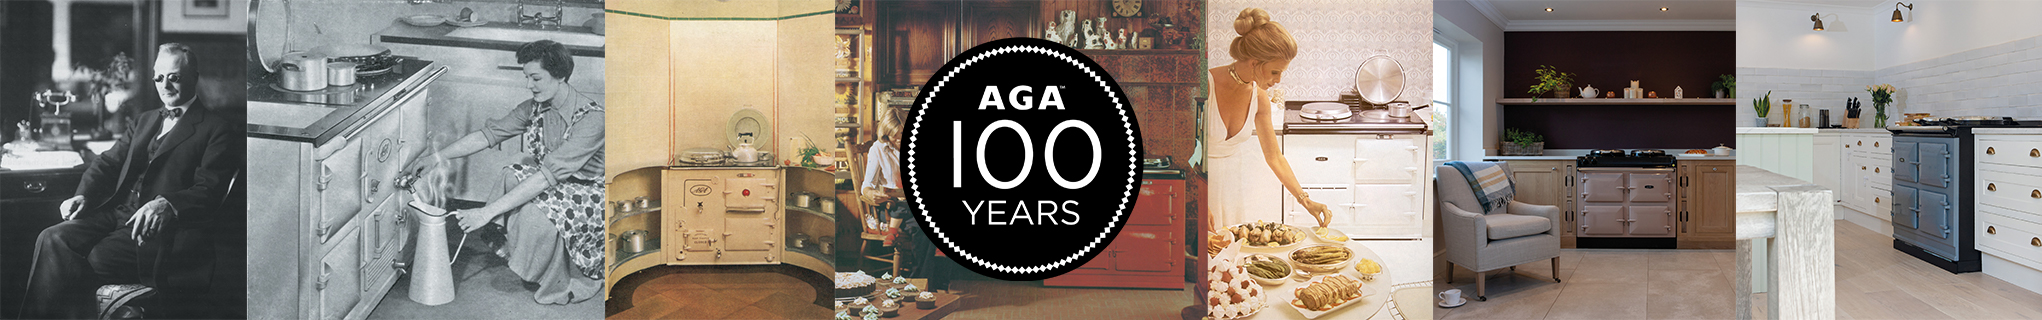 AGA cooker Archive adverts